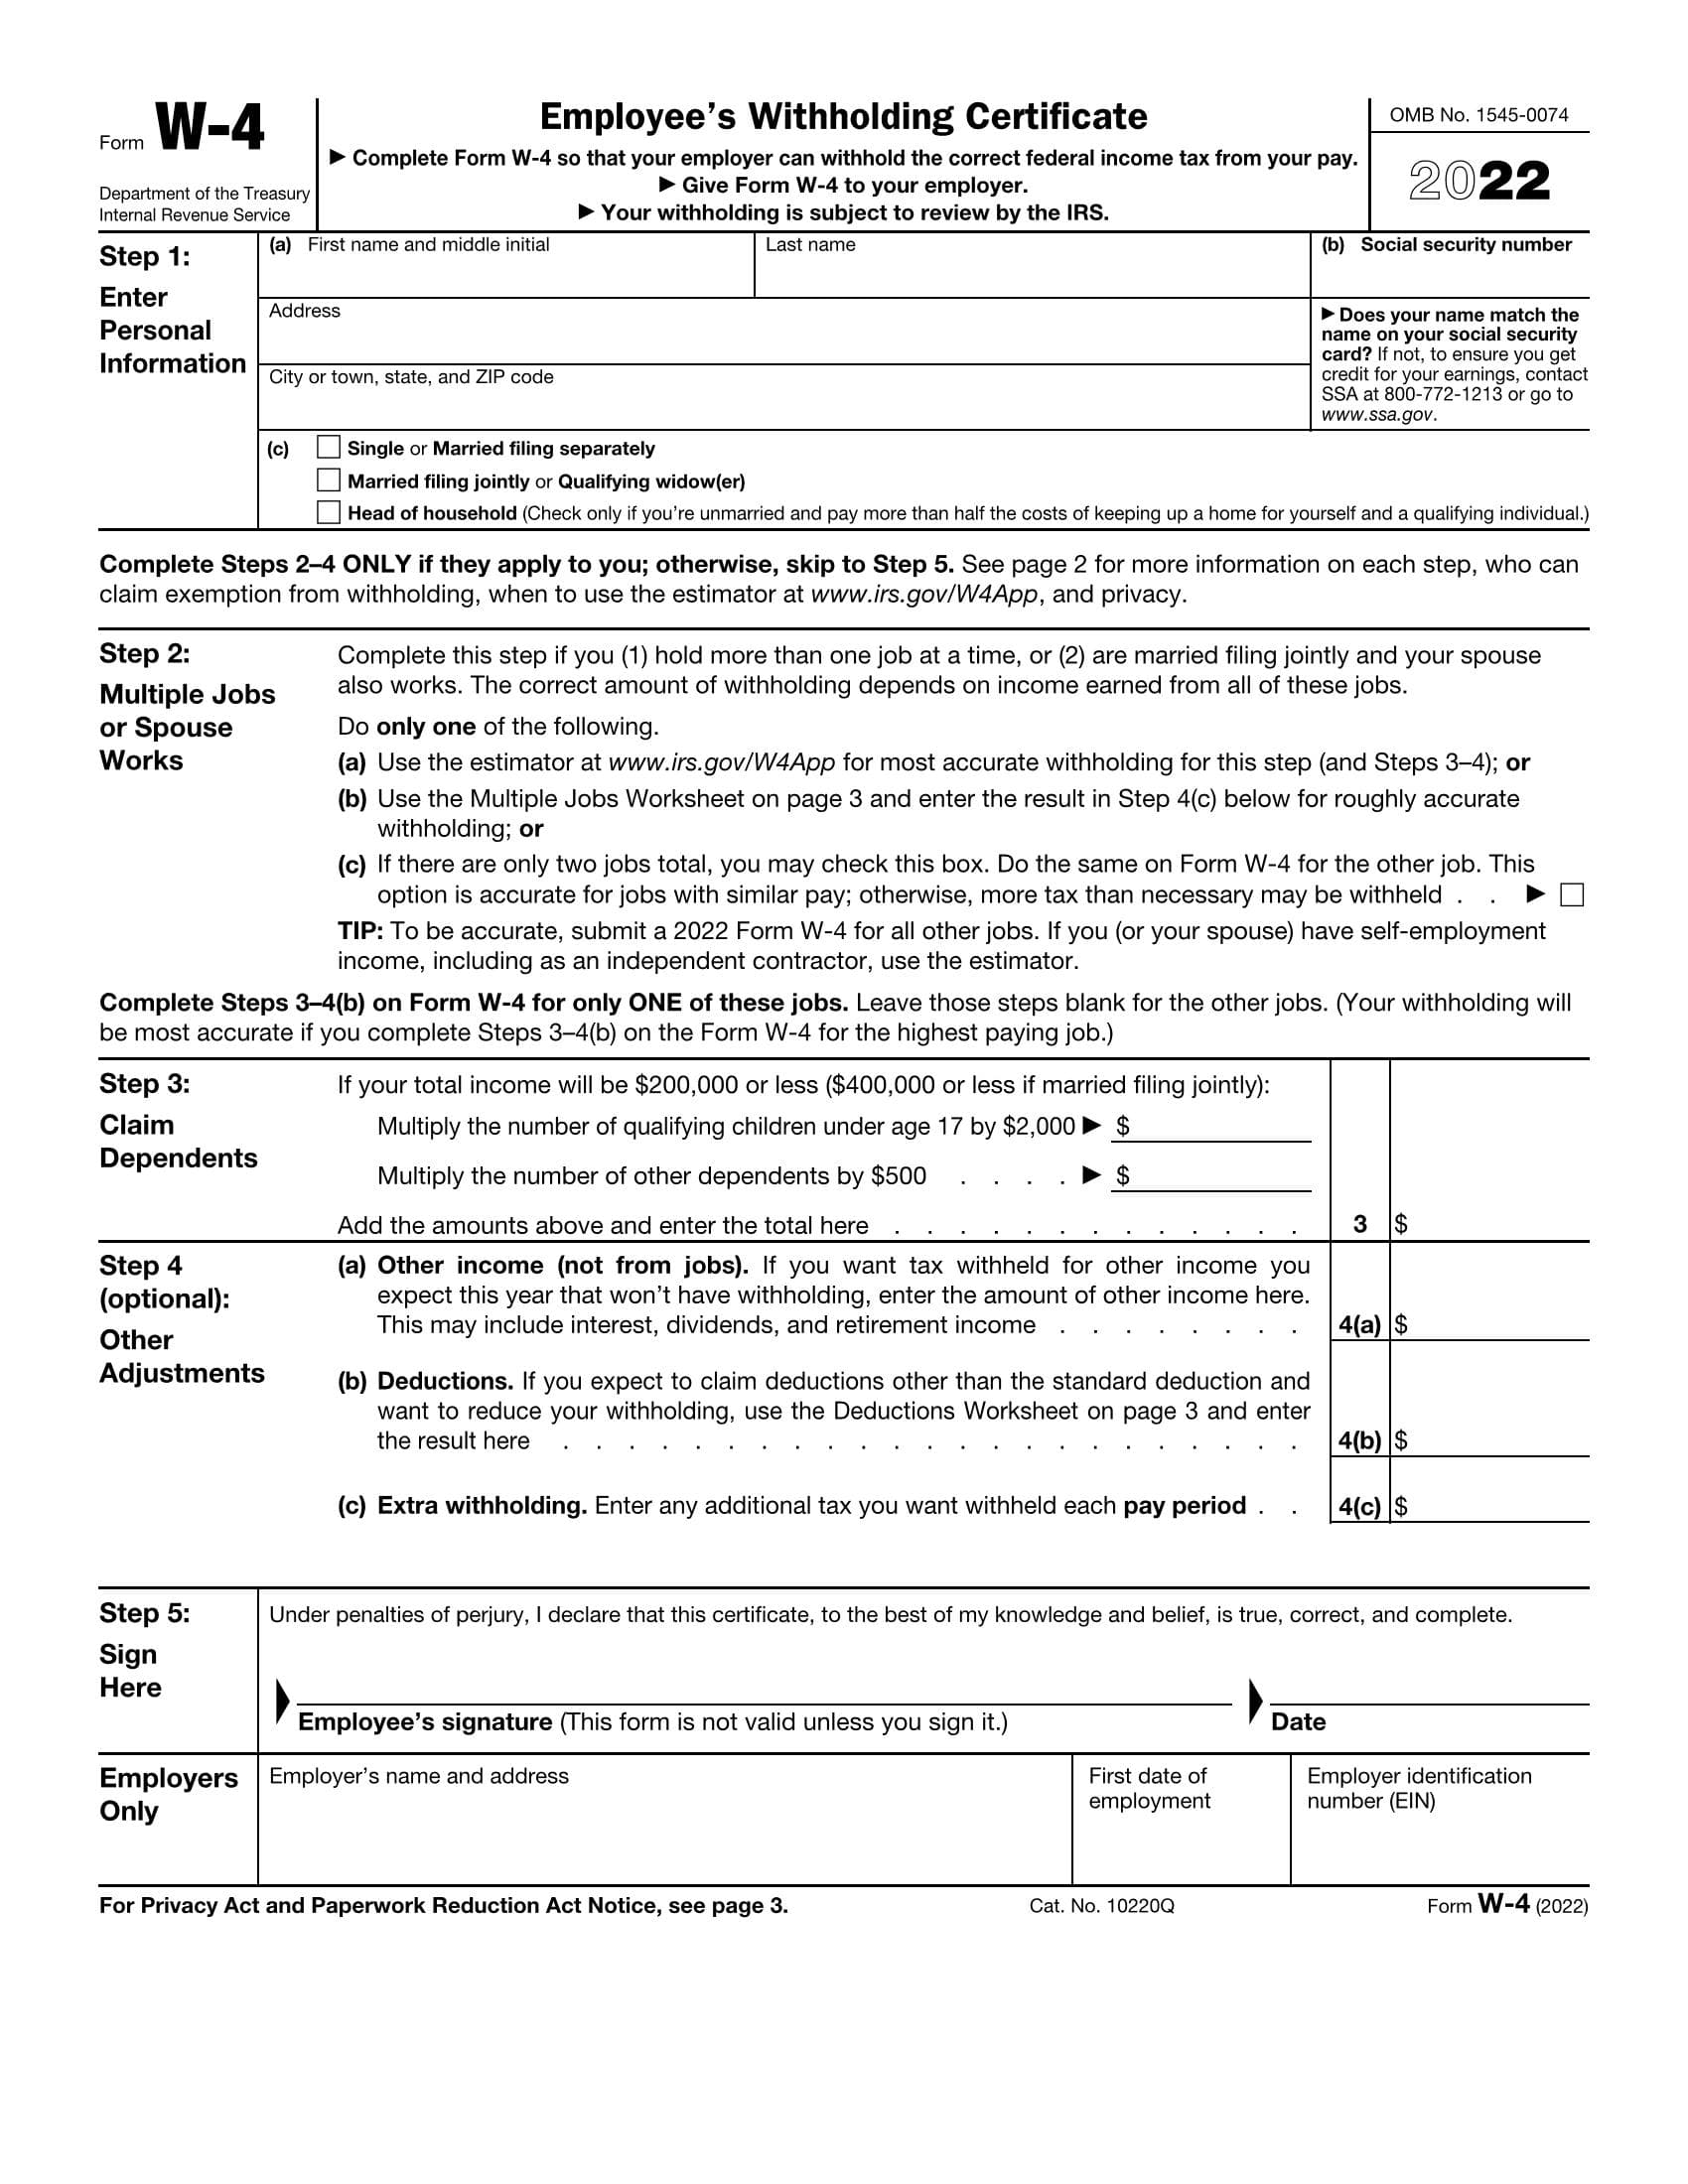 W4 Form Employee's Withholding Certificate Fillable Form